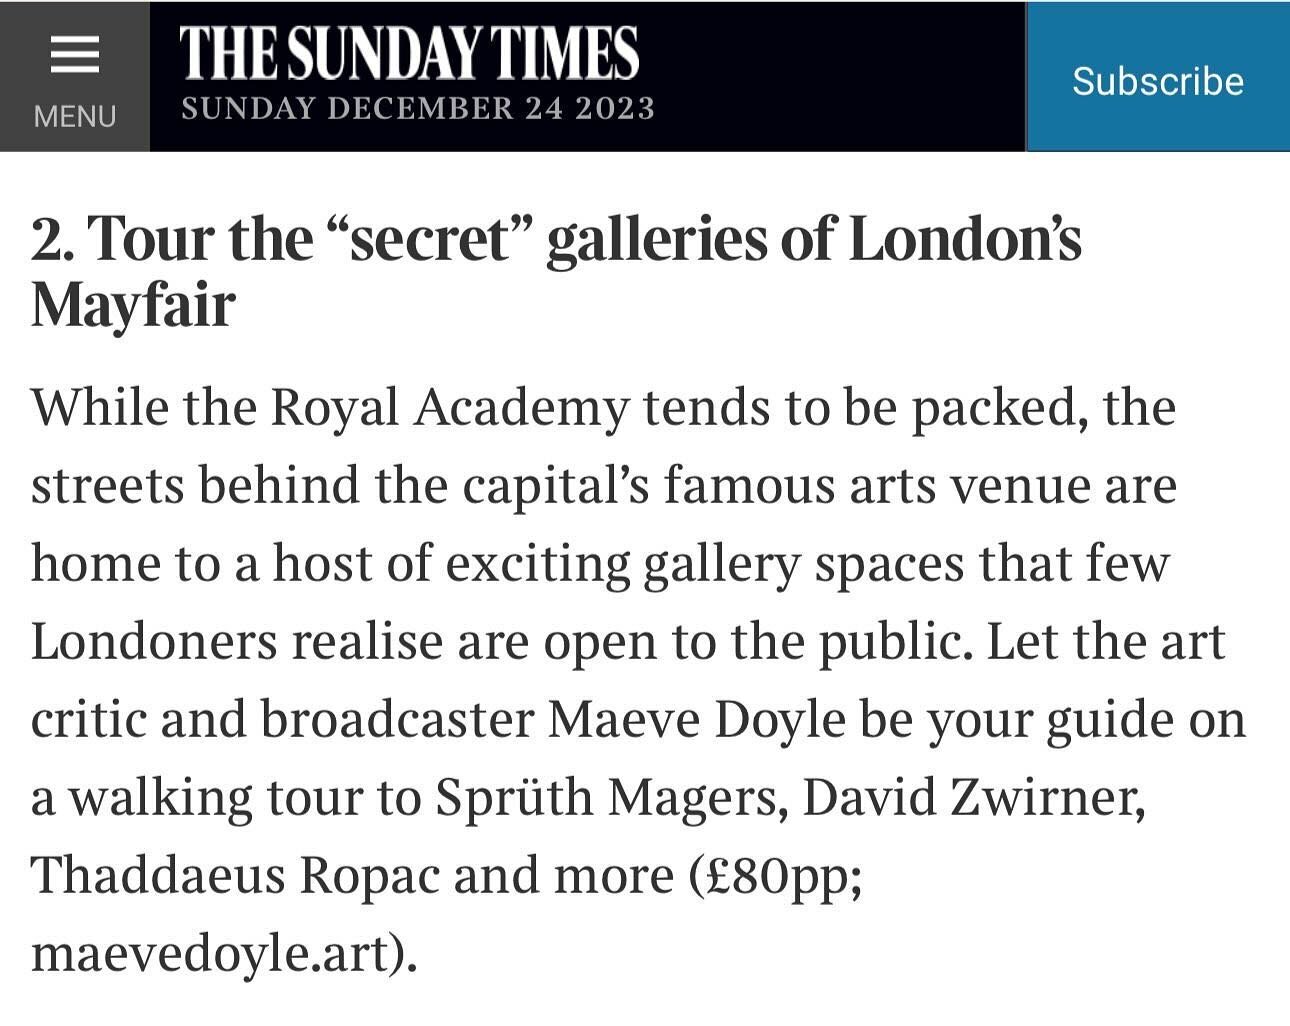 thank you @adrianbridge and @thetimes for the mention and thank you @hannahlouisewatters @roccofortehotels for putting me forward @maddoxgallery